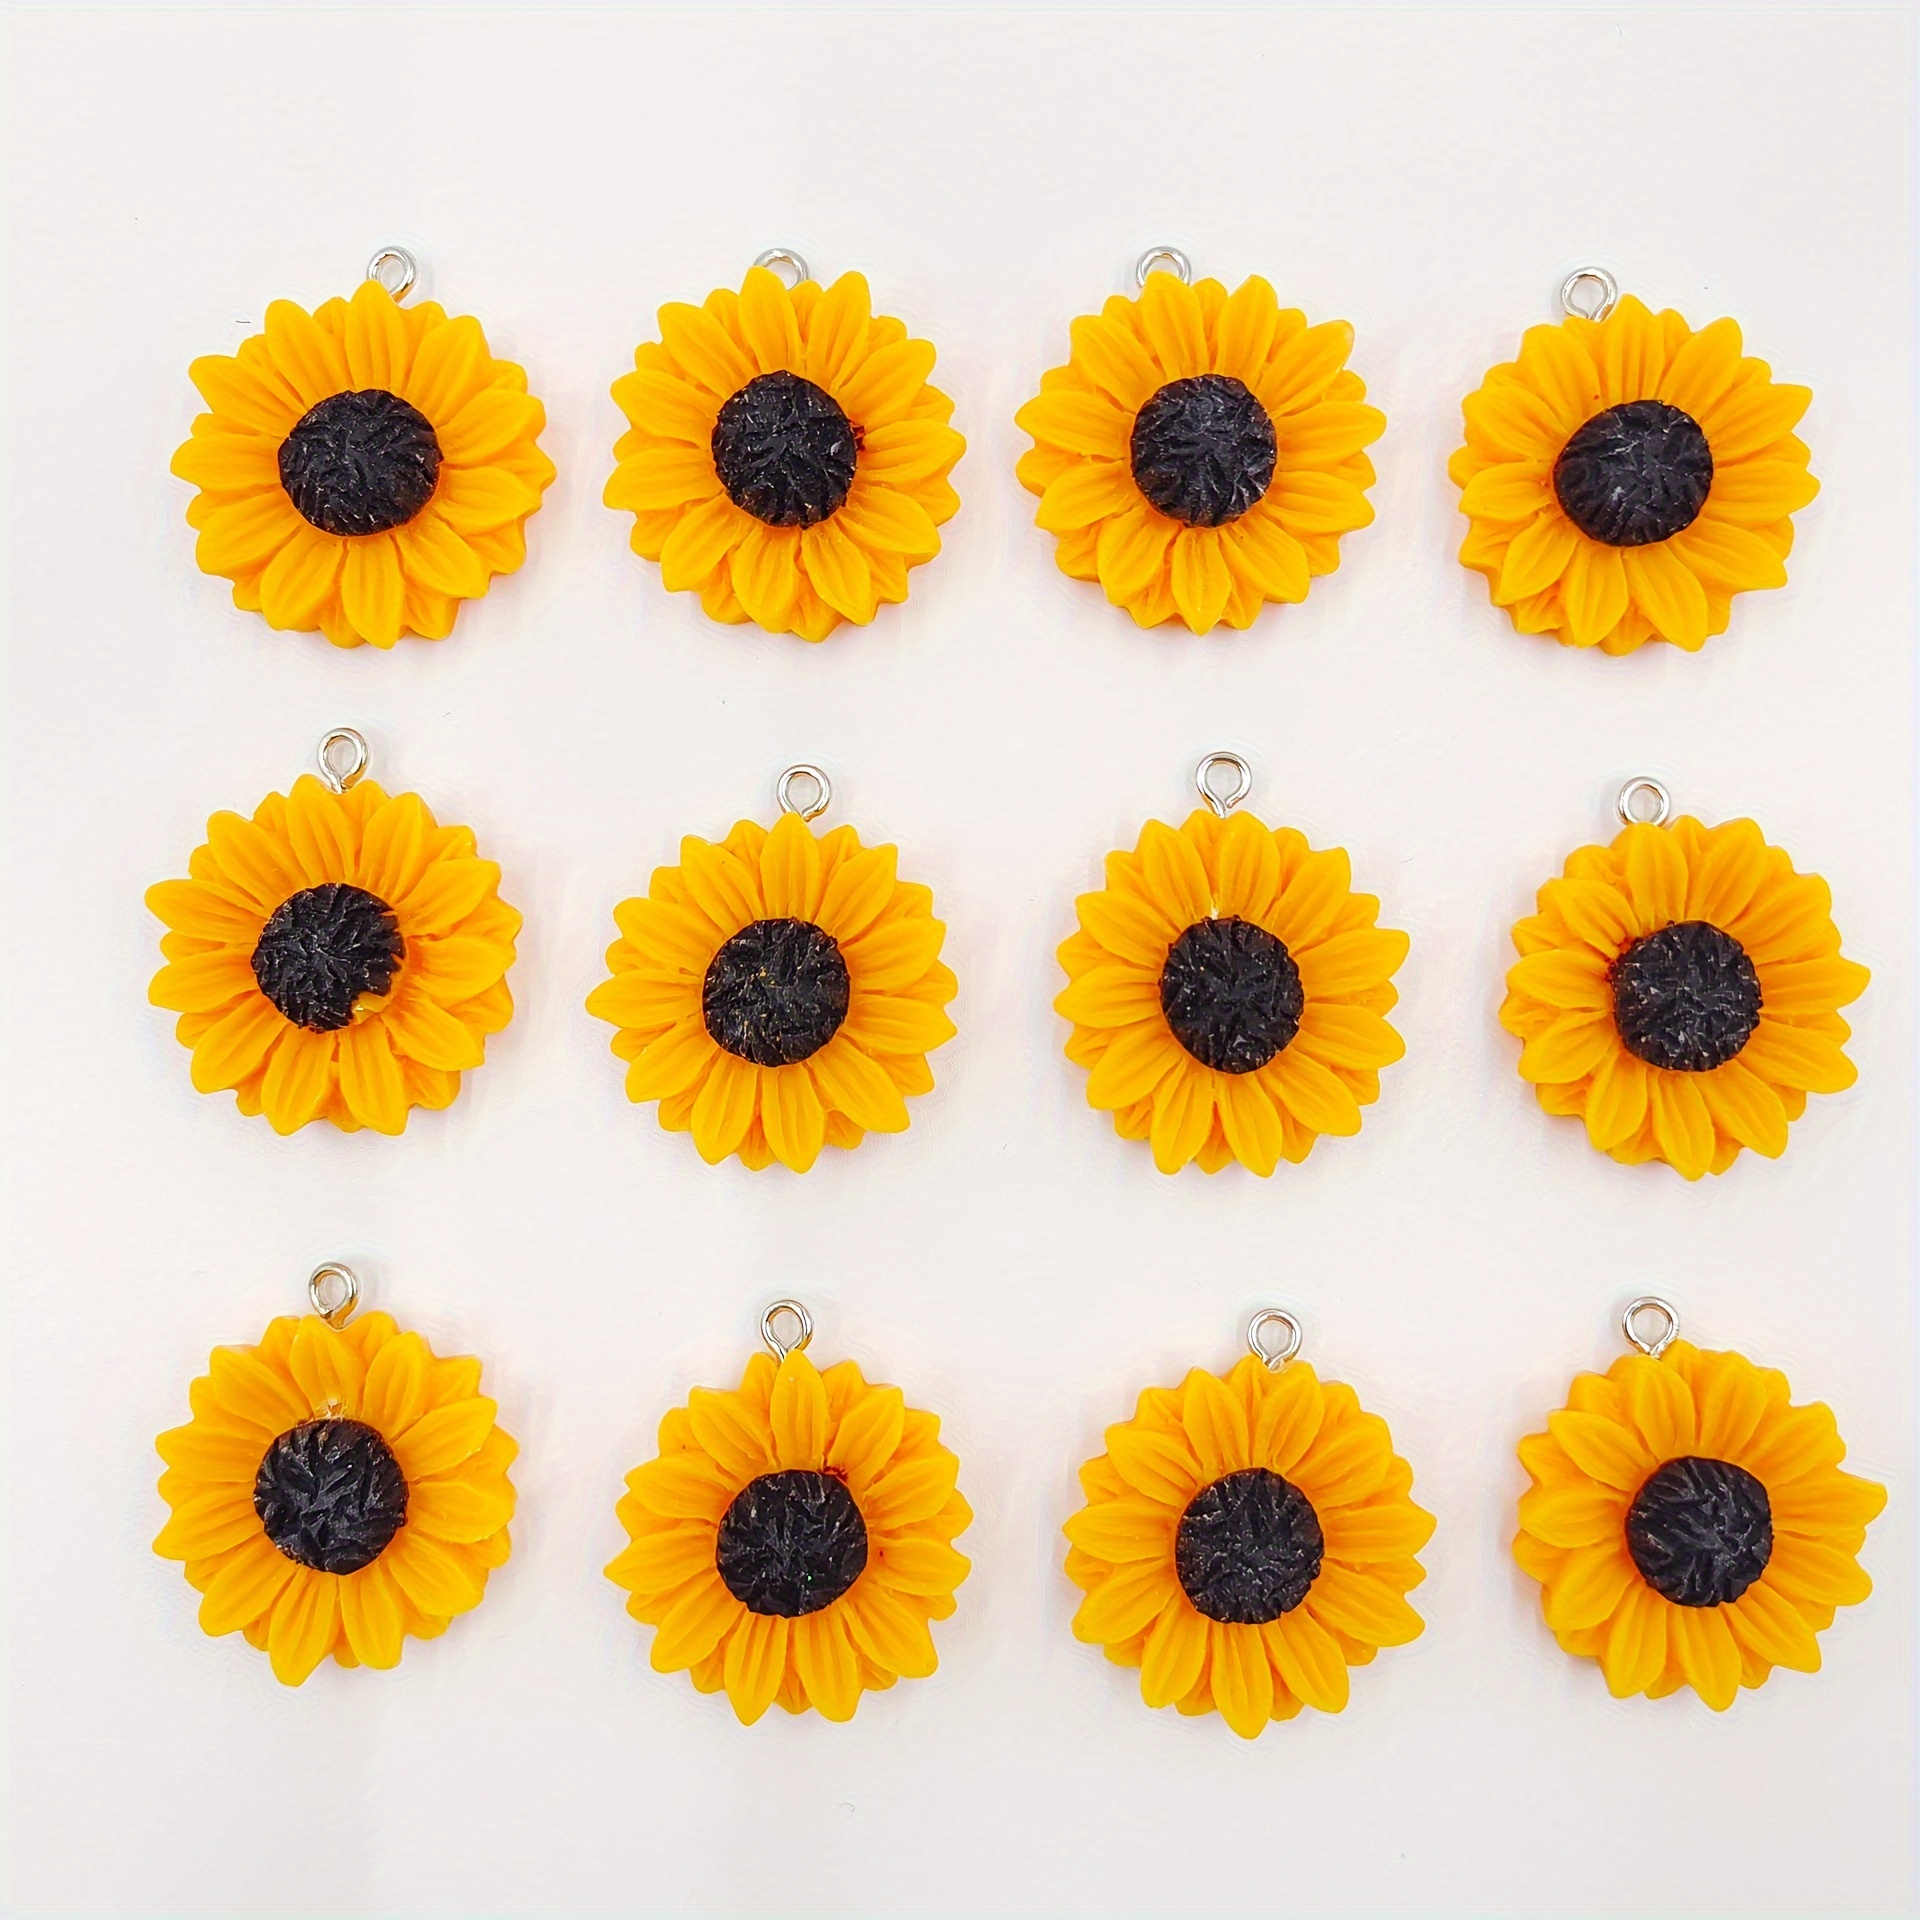 

10pcs Resin Yellow Sunflower Charms Sun Flower Pendants For Jewelry Making Diy Handmade Earrings Necklace Key Chain Accessories